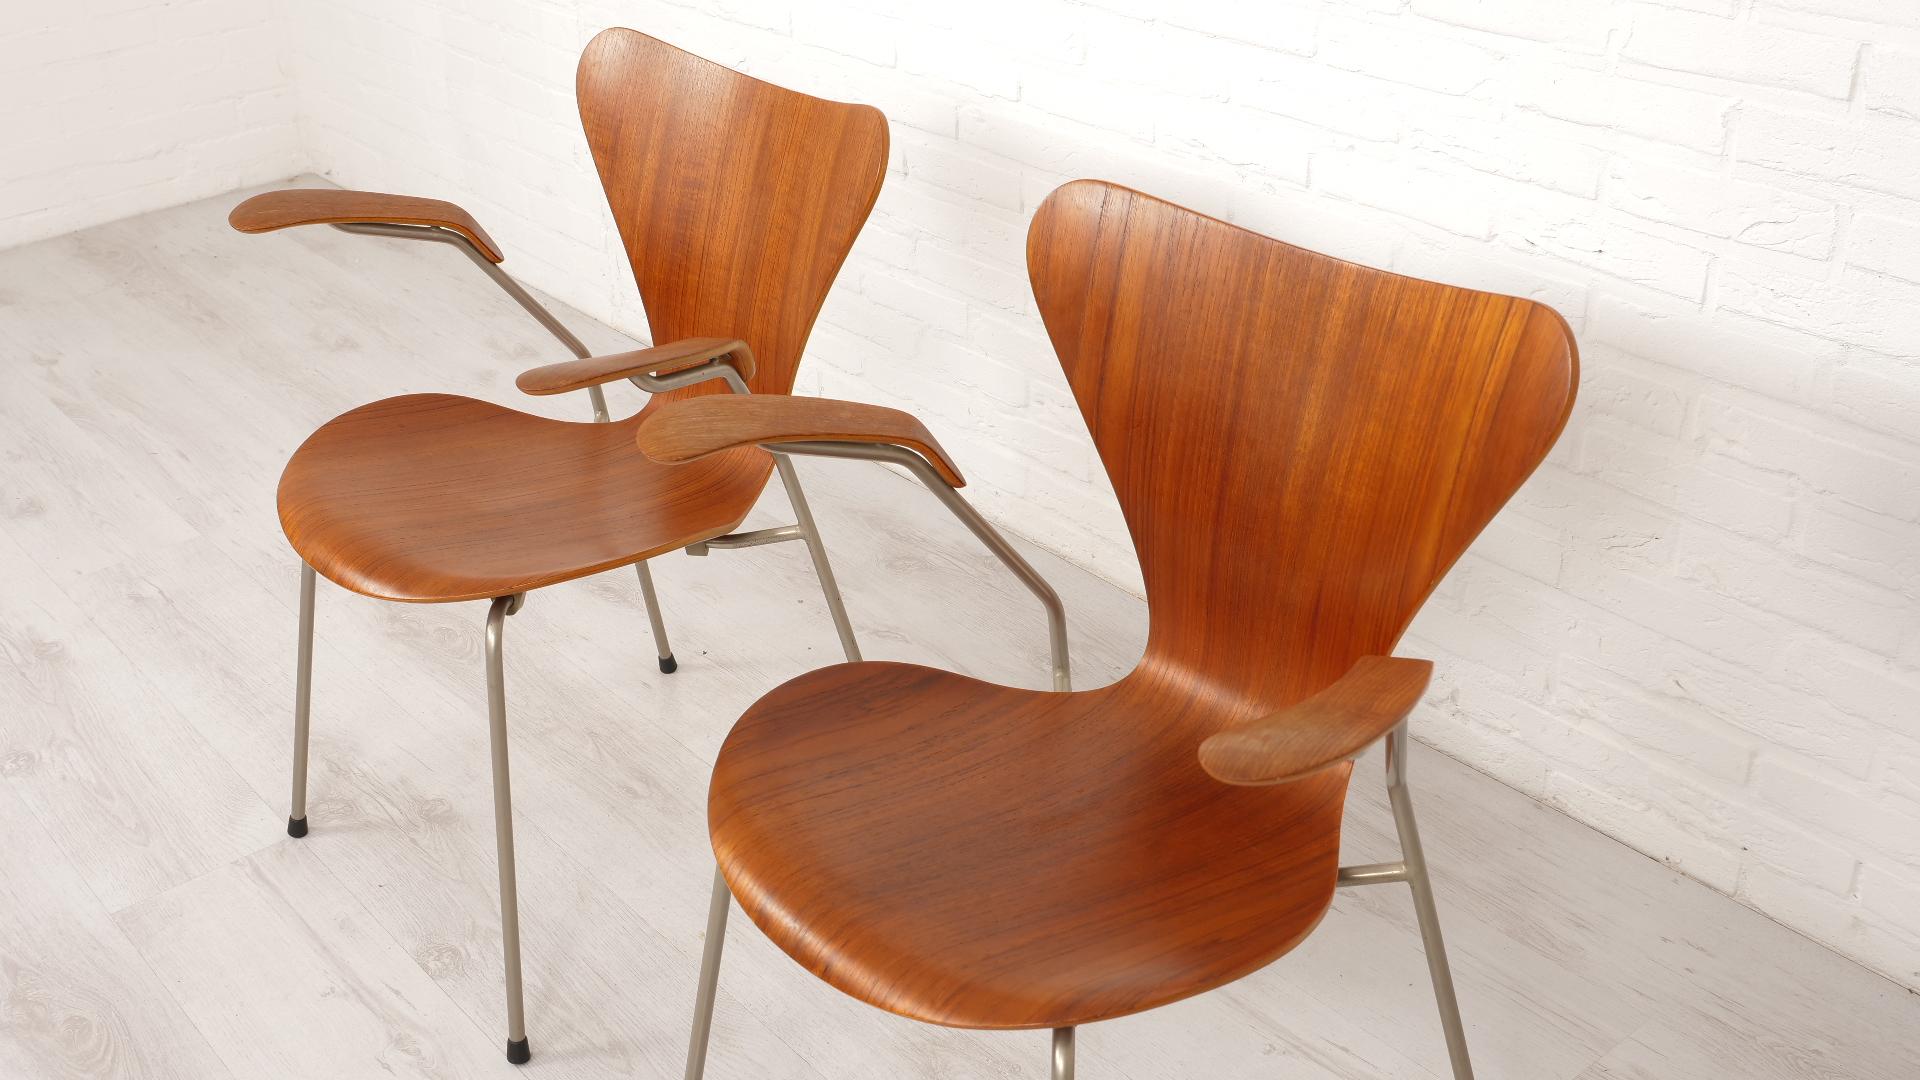 Mid-19th Century 2 Vintage butterfly chairs with armrests by Arne Jacobsen model 3207 Teak For Sale